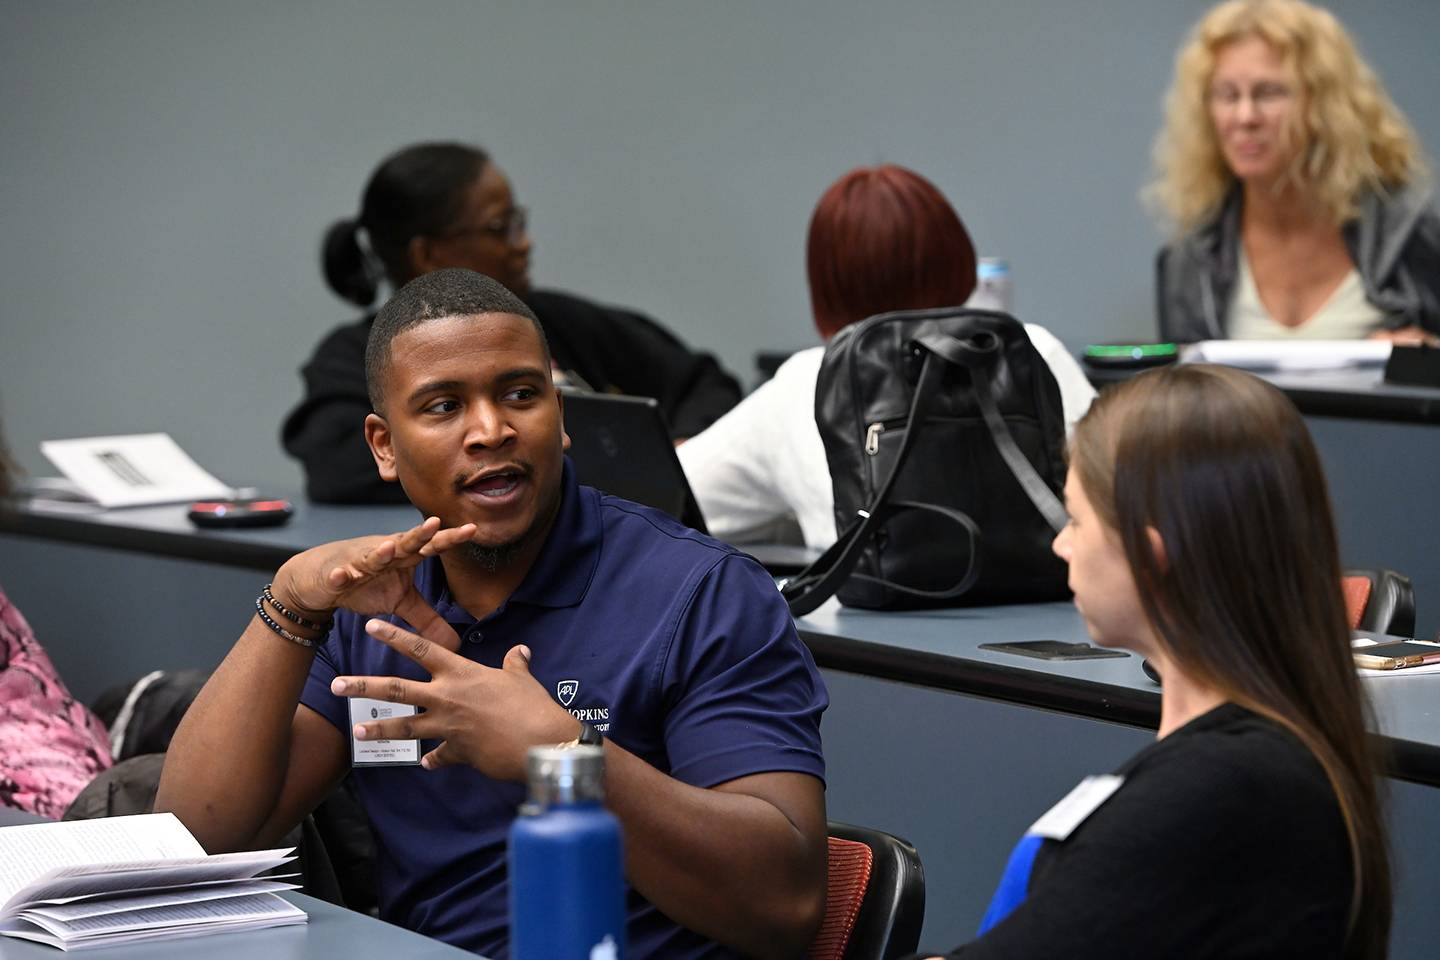 Workshop participants discuss during Diversity and Inclusion Conference